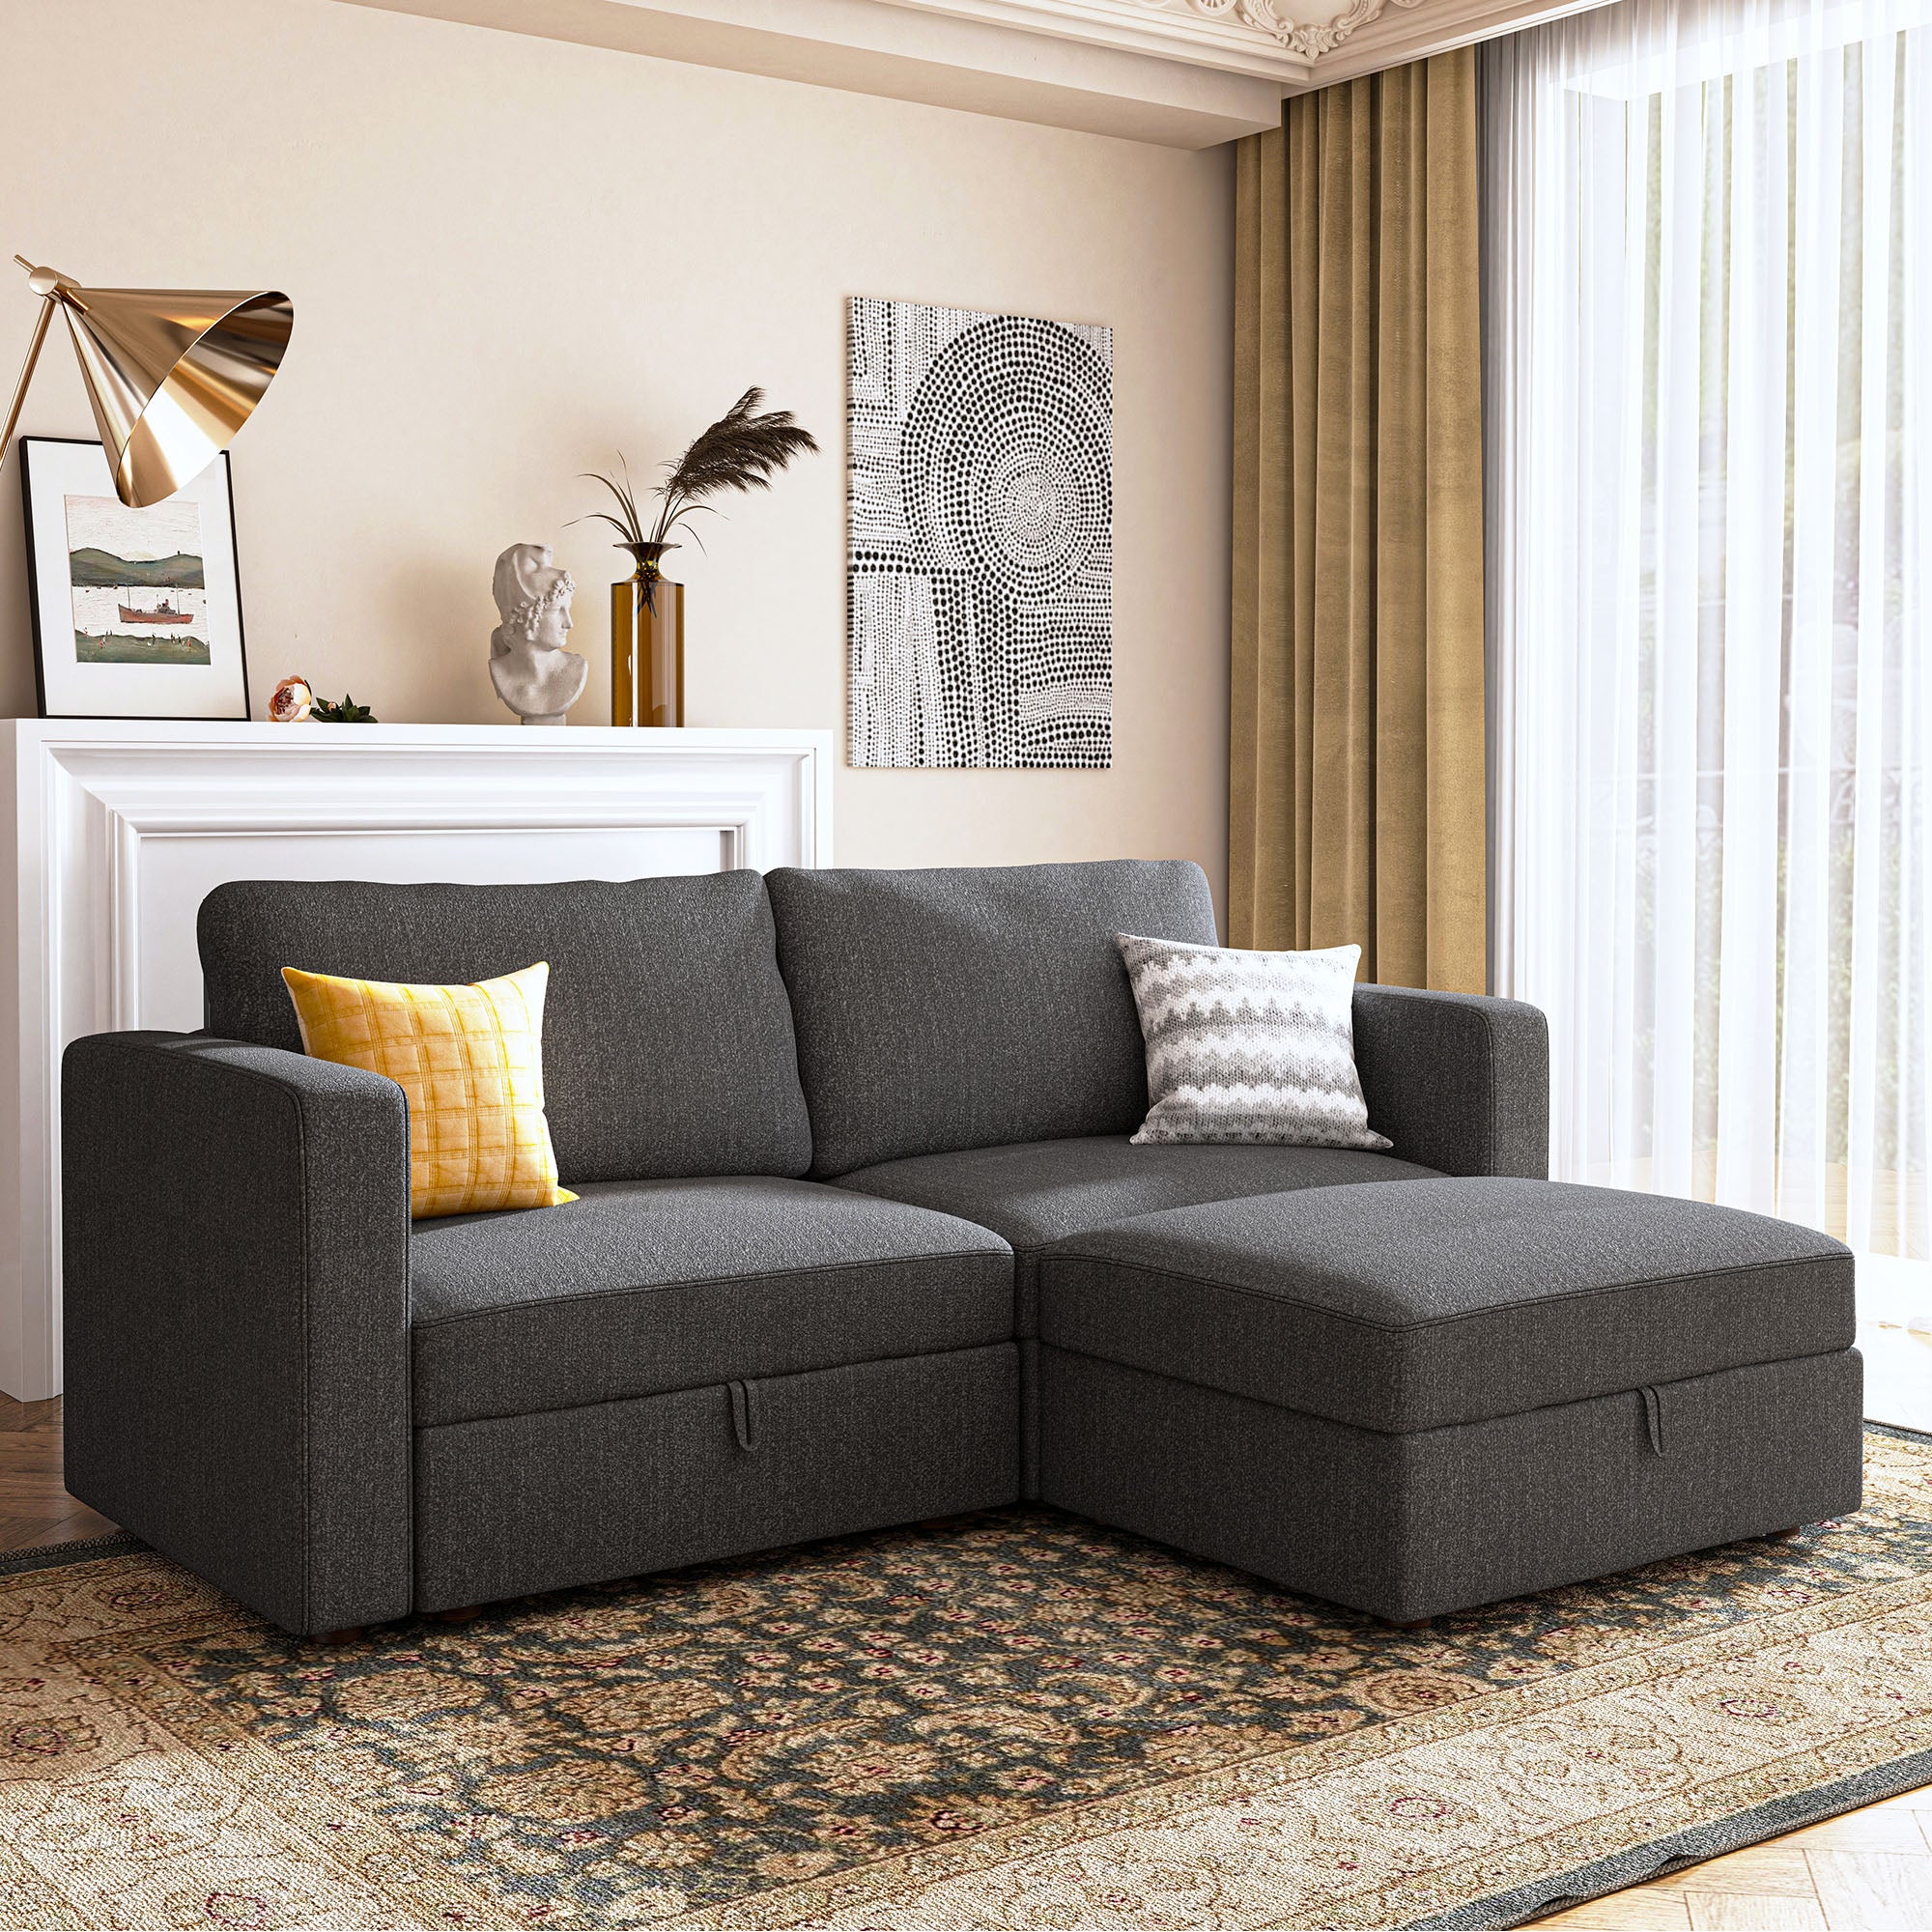 HONBAY Dark Grey Fabric L-shaped 2 Seaters Storage Modular Sectional Sofa for Living Room